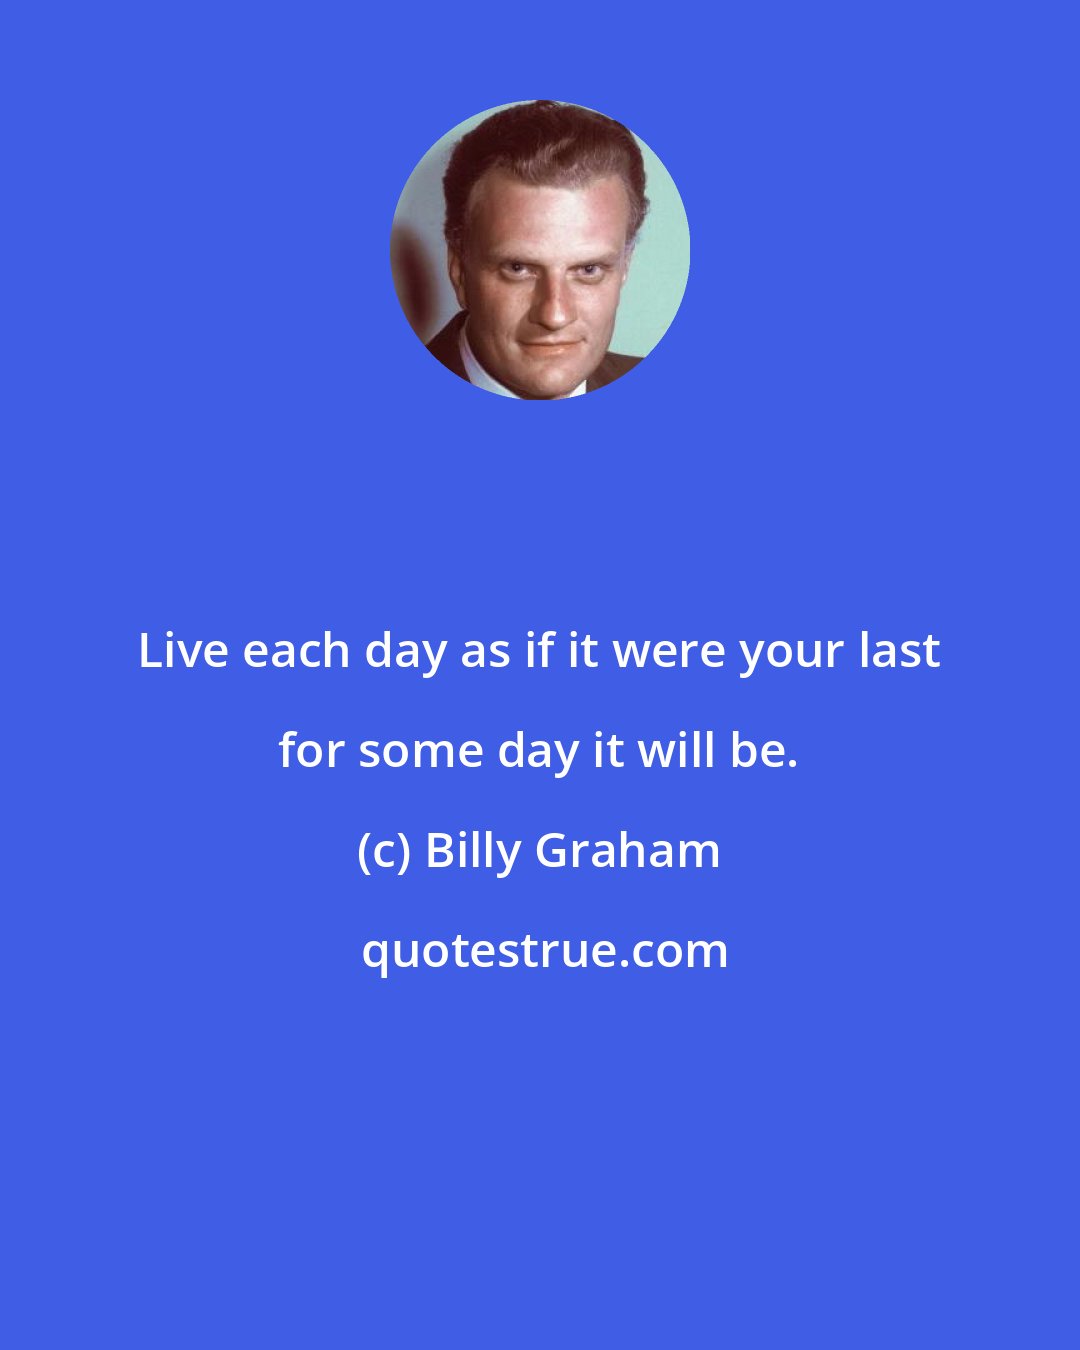 Billy Graham: Live each day as if it were your last for some day it will be.